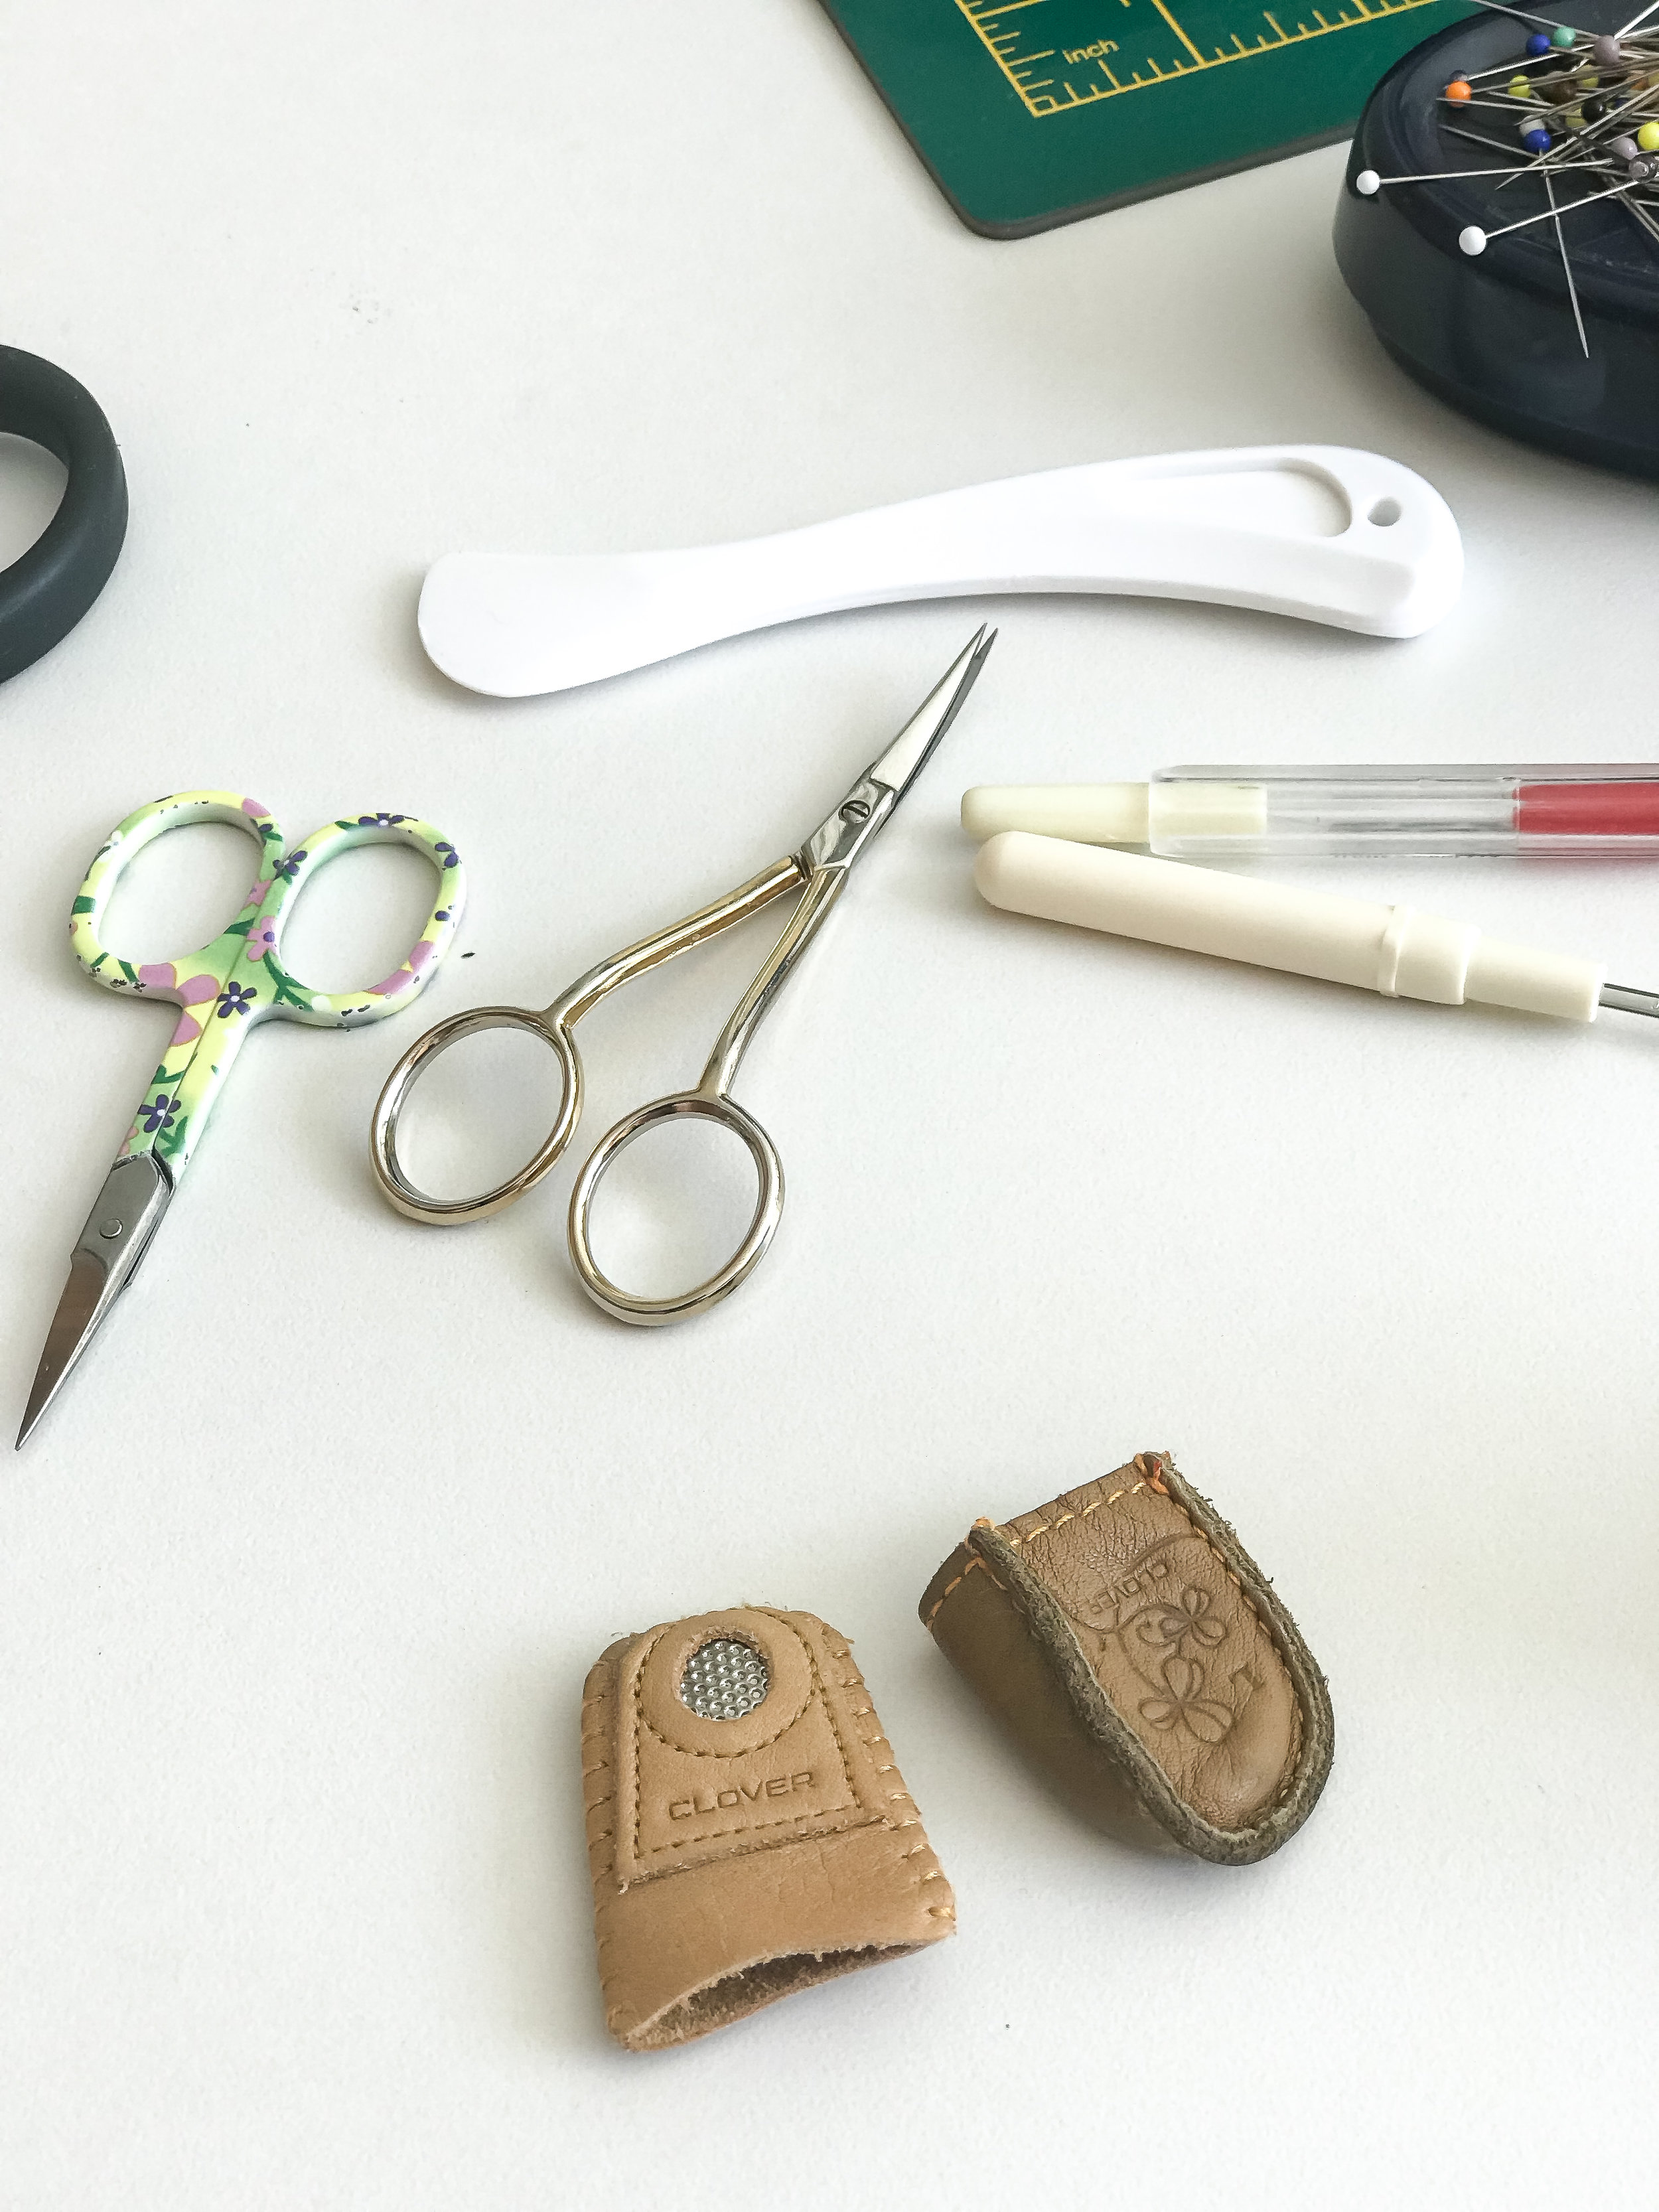 13 CUTTING TOOLS you need for sewing - SewGuide